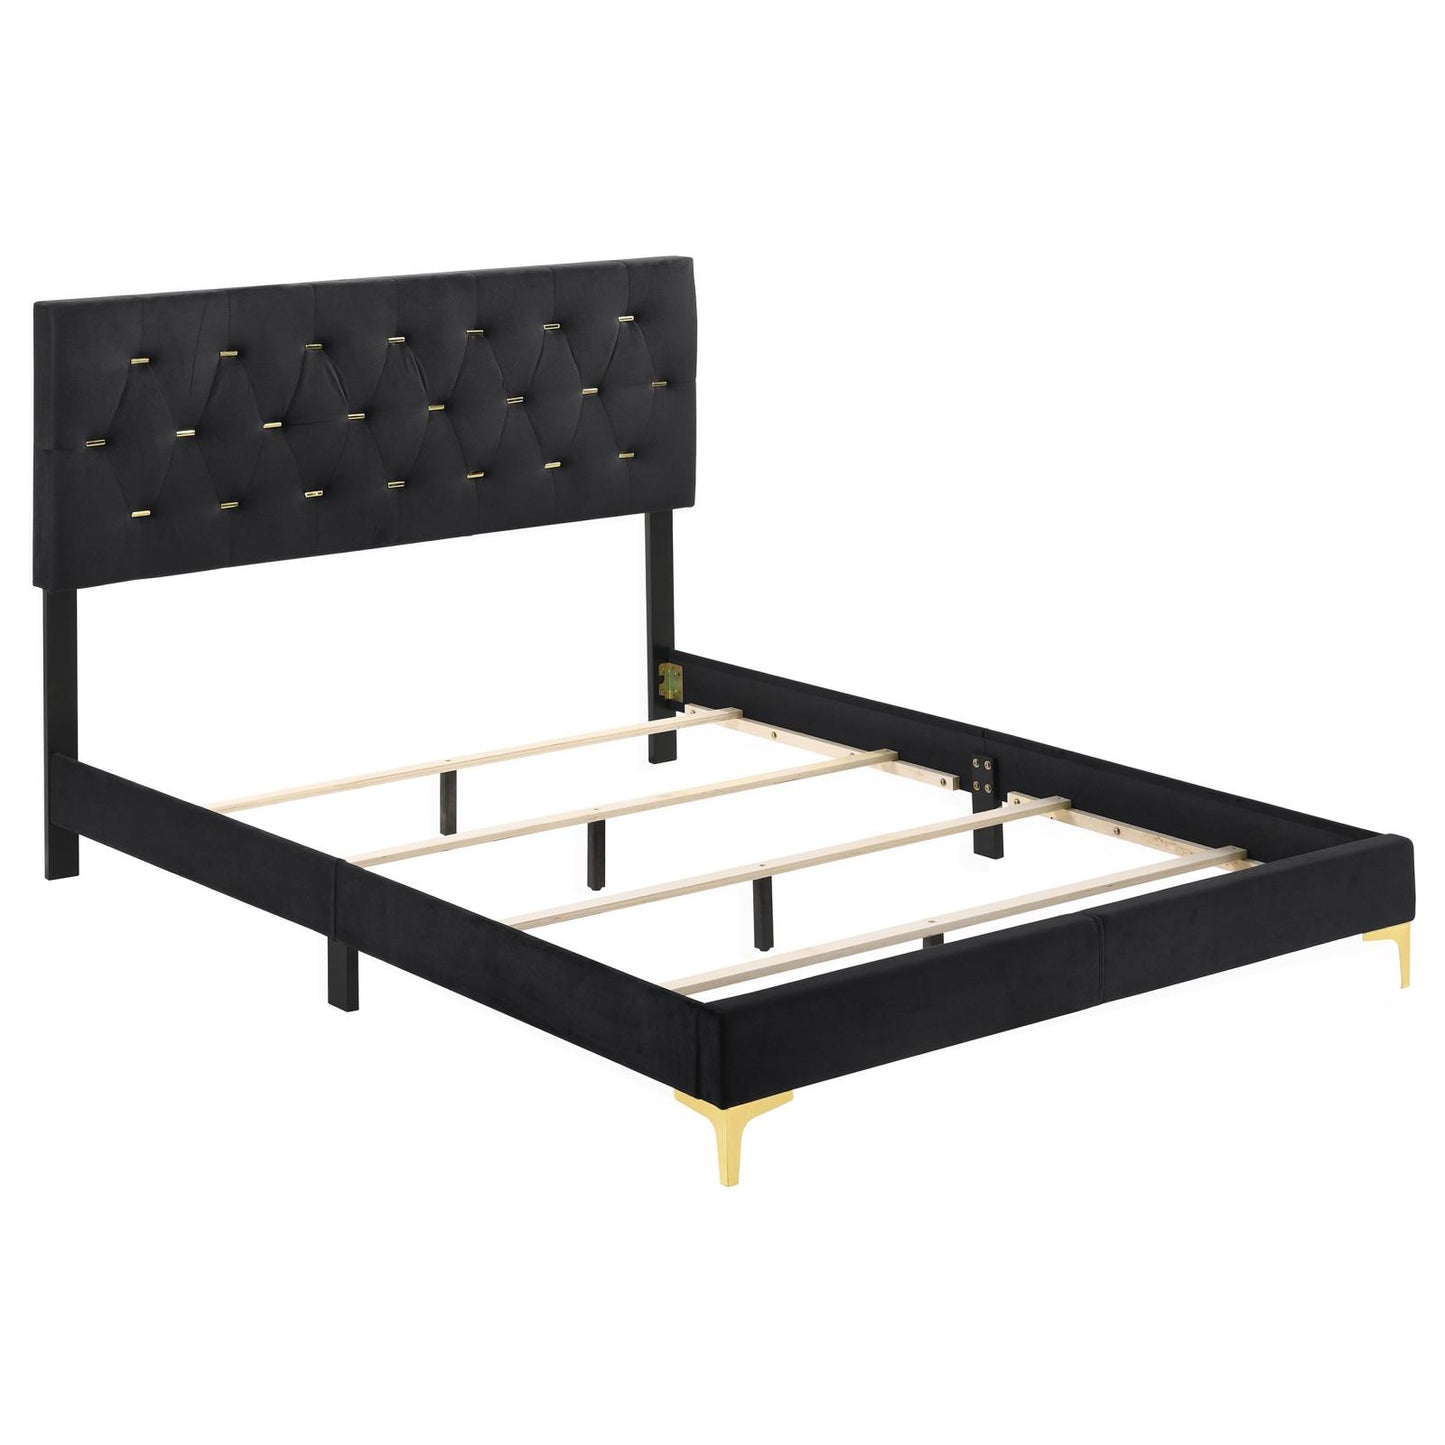 Kendall 3-piece Tufted Panel California King Bedroom Set Black and Gold